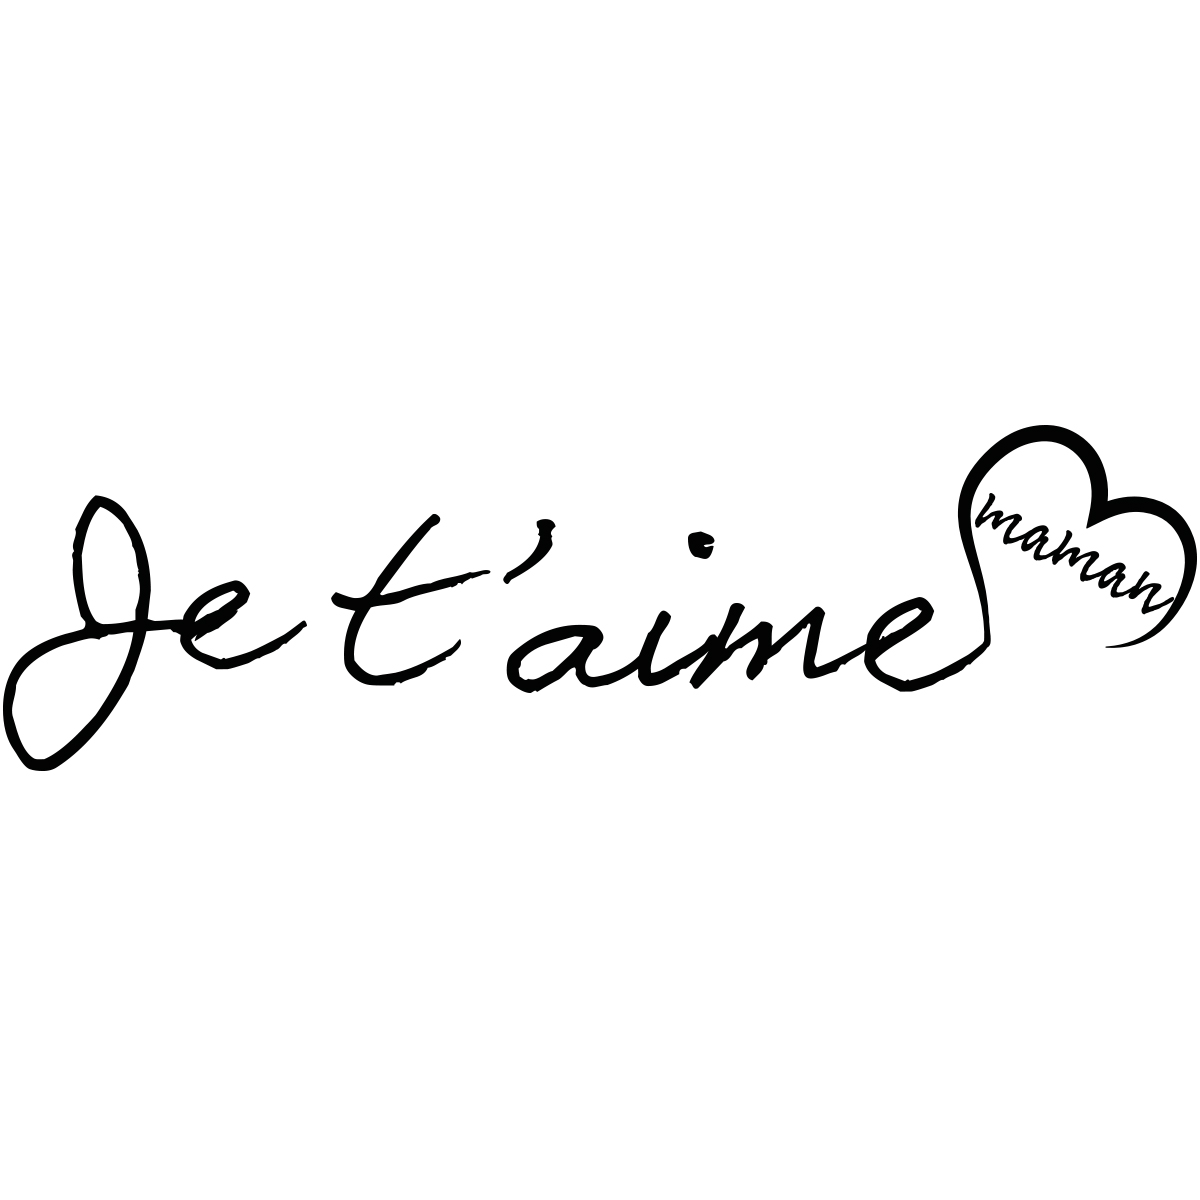 Quote Wall Sticker Je T Aime Maman Wall Decals Quote Wall Stickers Love Ambiance Sticker